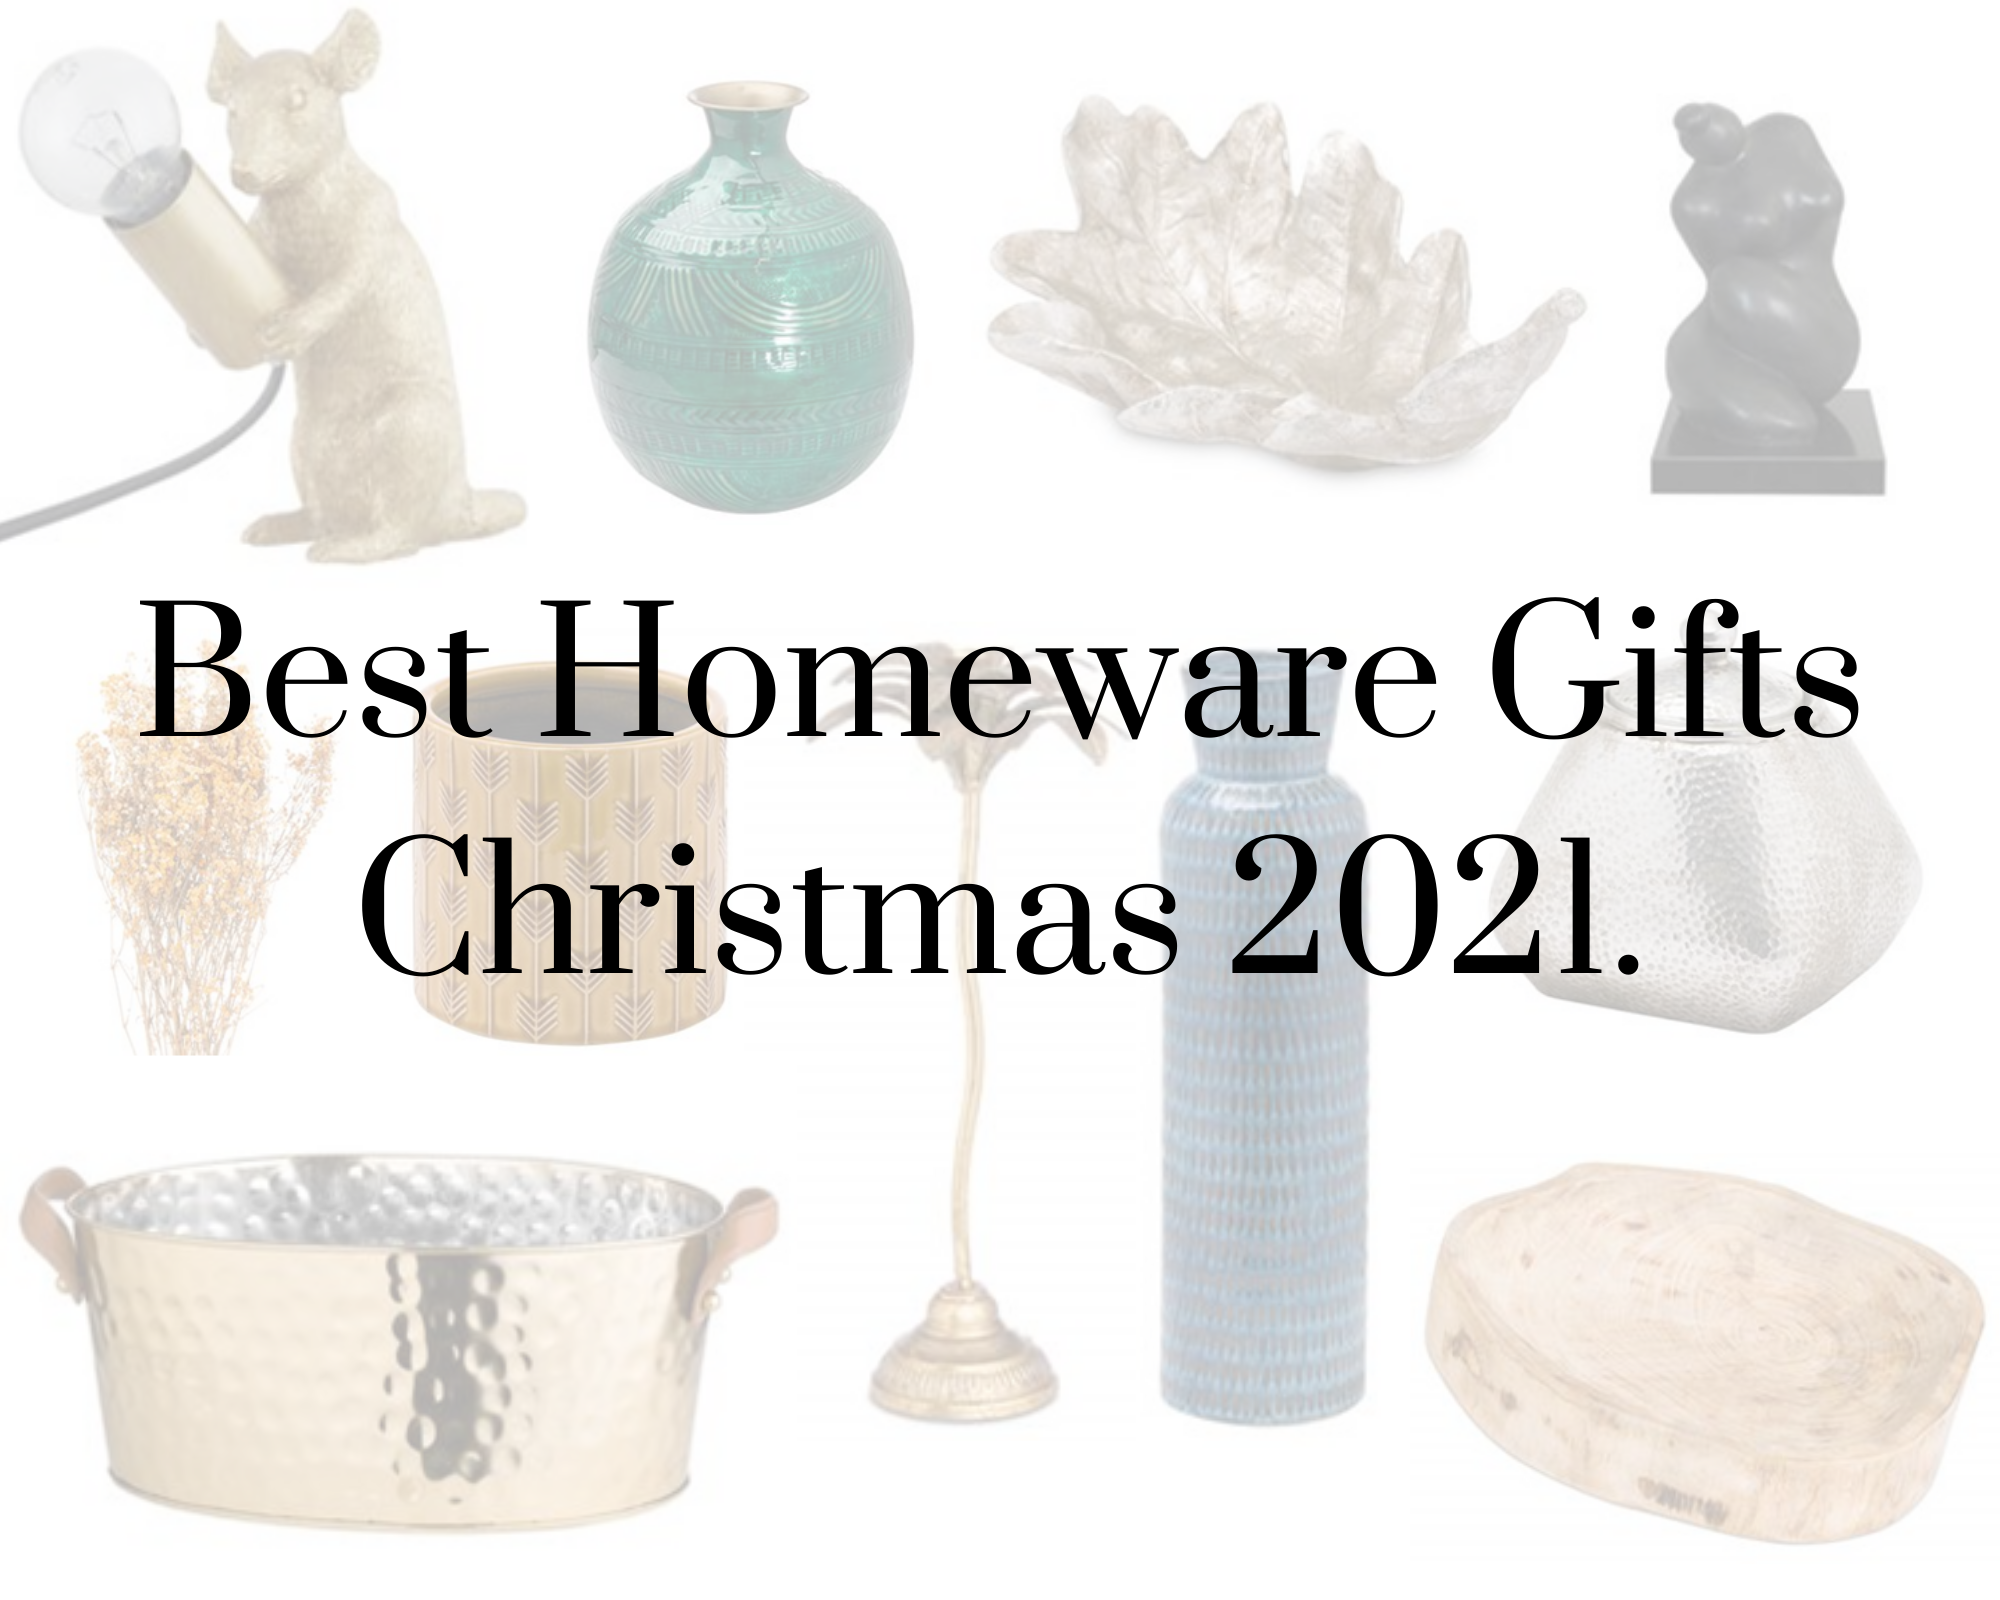 Gift Guide 2021: Christmas Gifts for the Home